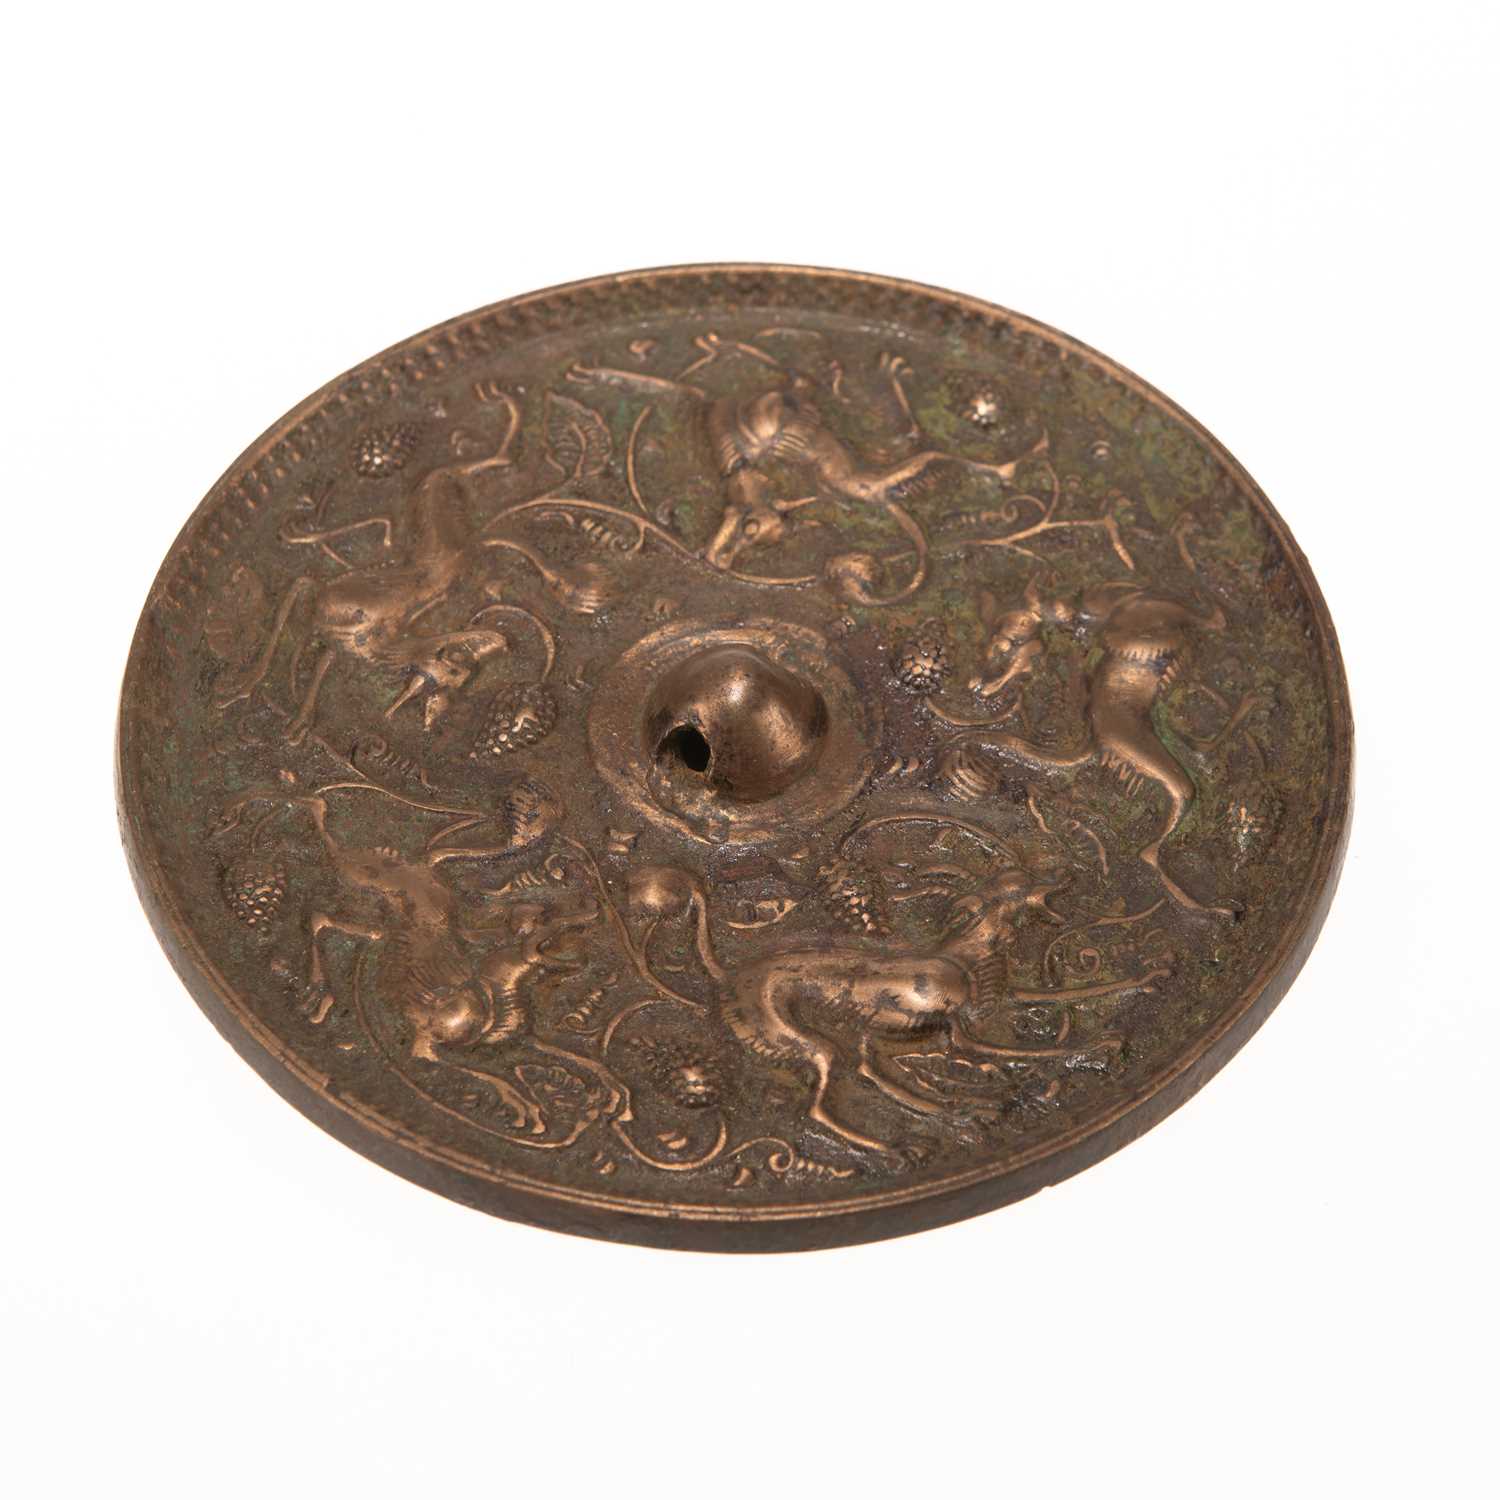 A CHINESE BRONZE MIRROR, TANG DYNASTY